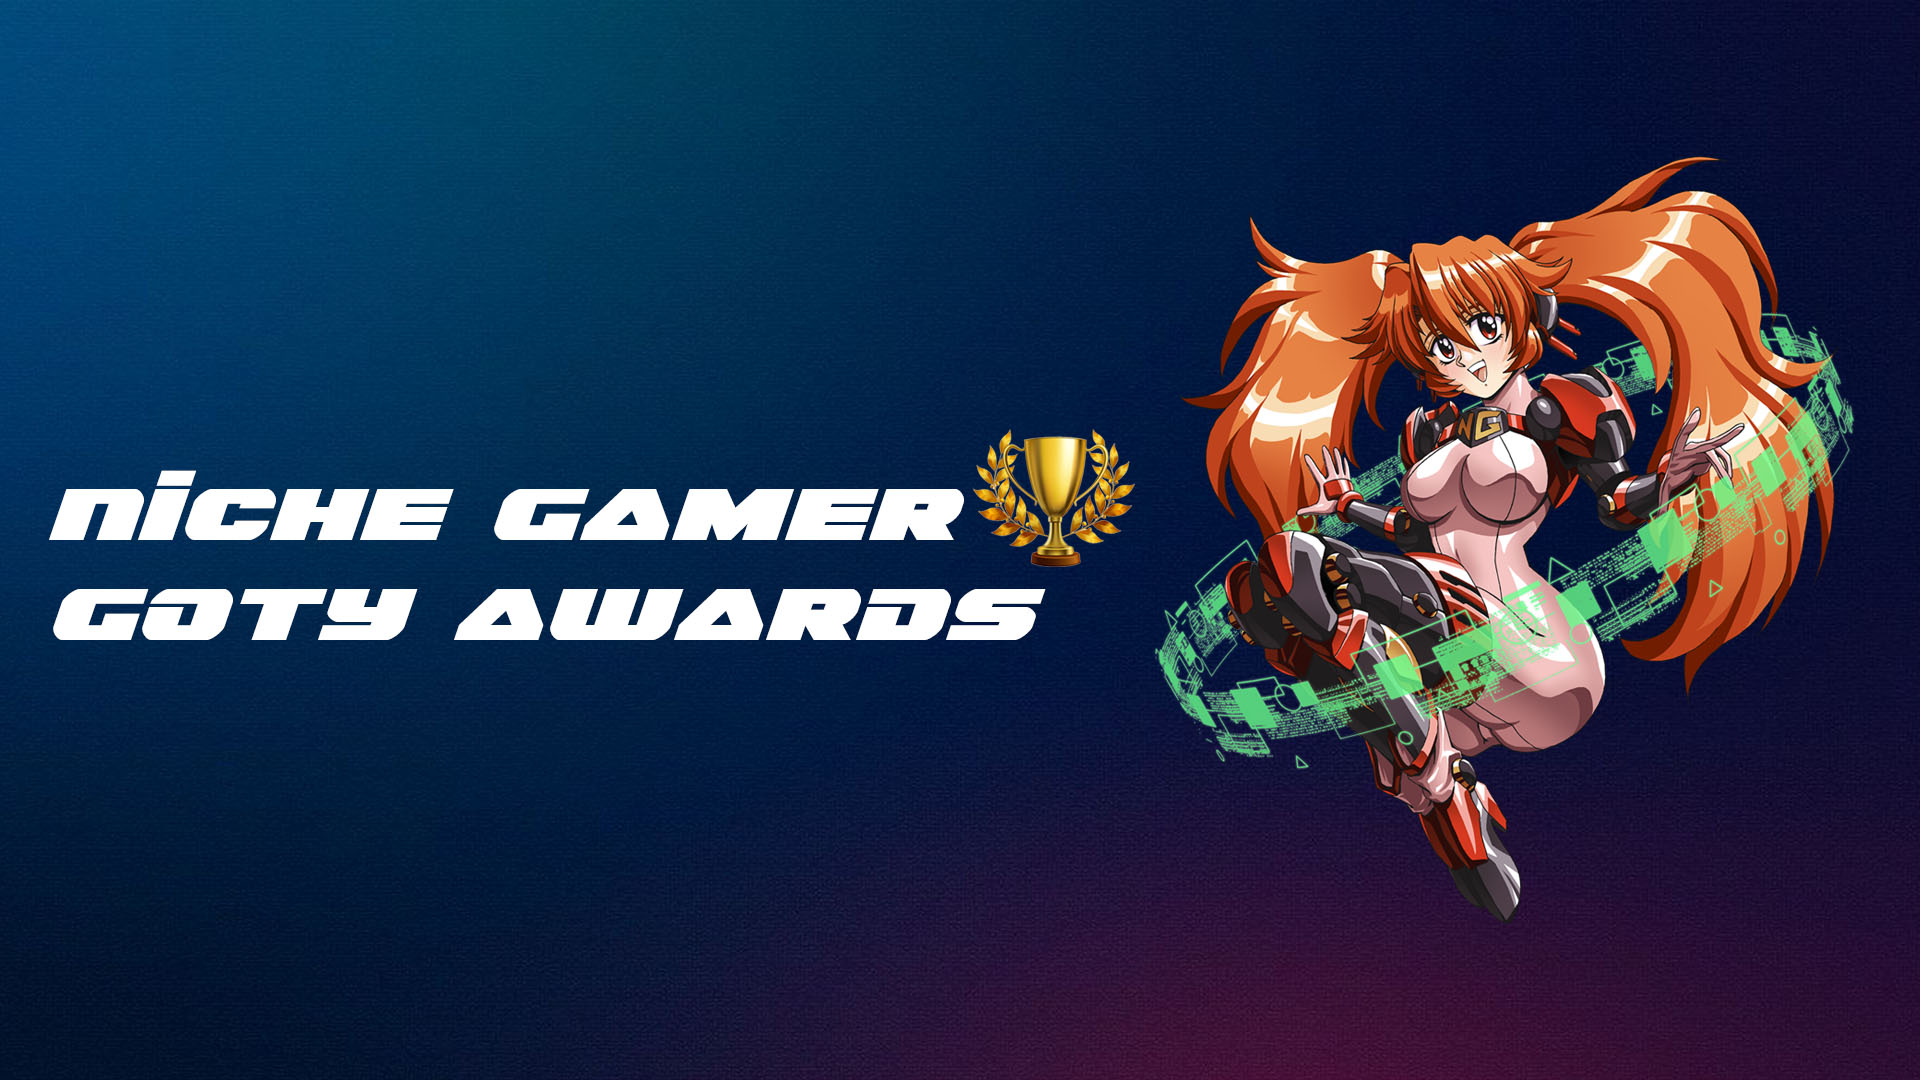 Game of the Year Awards 2021